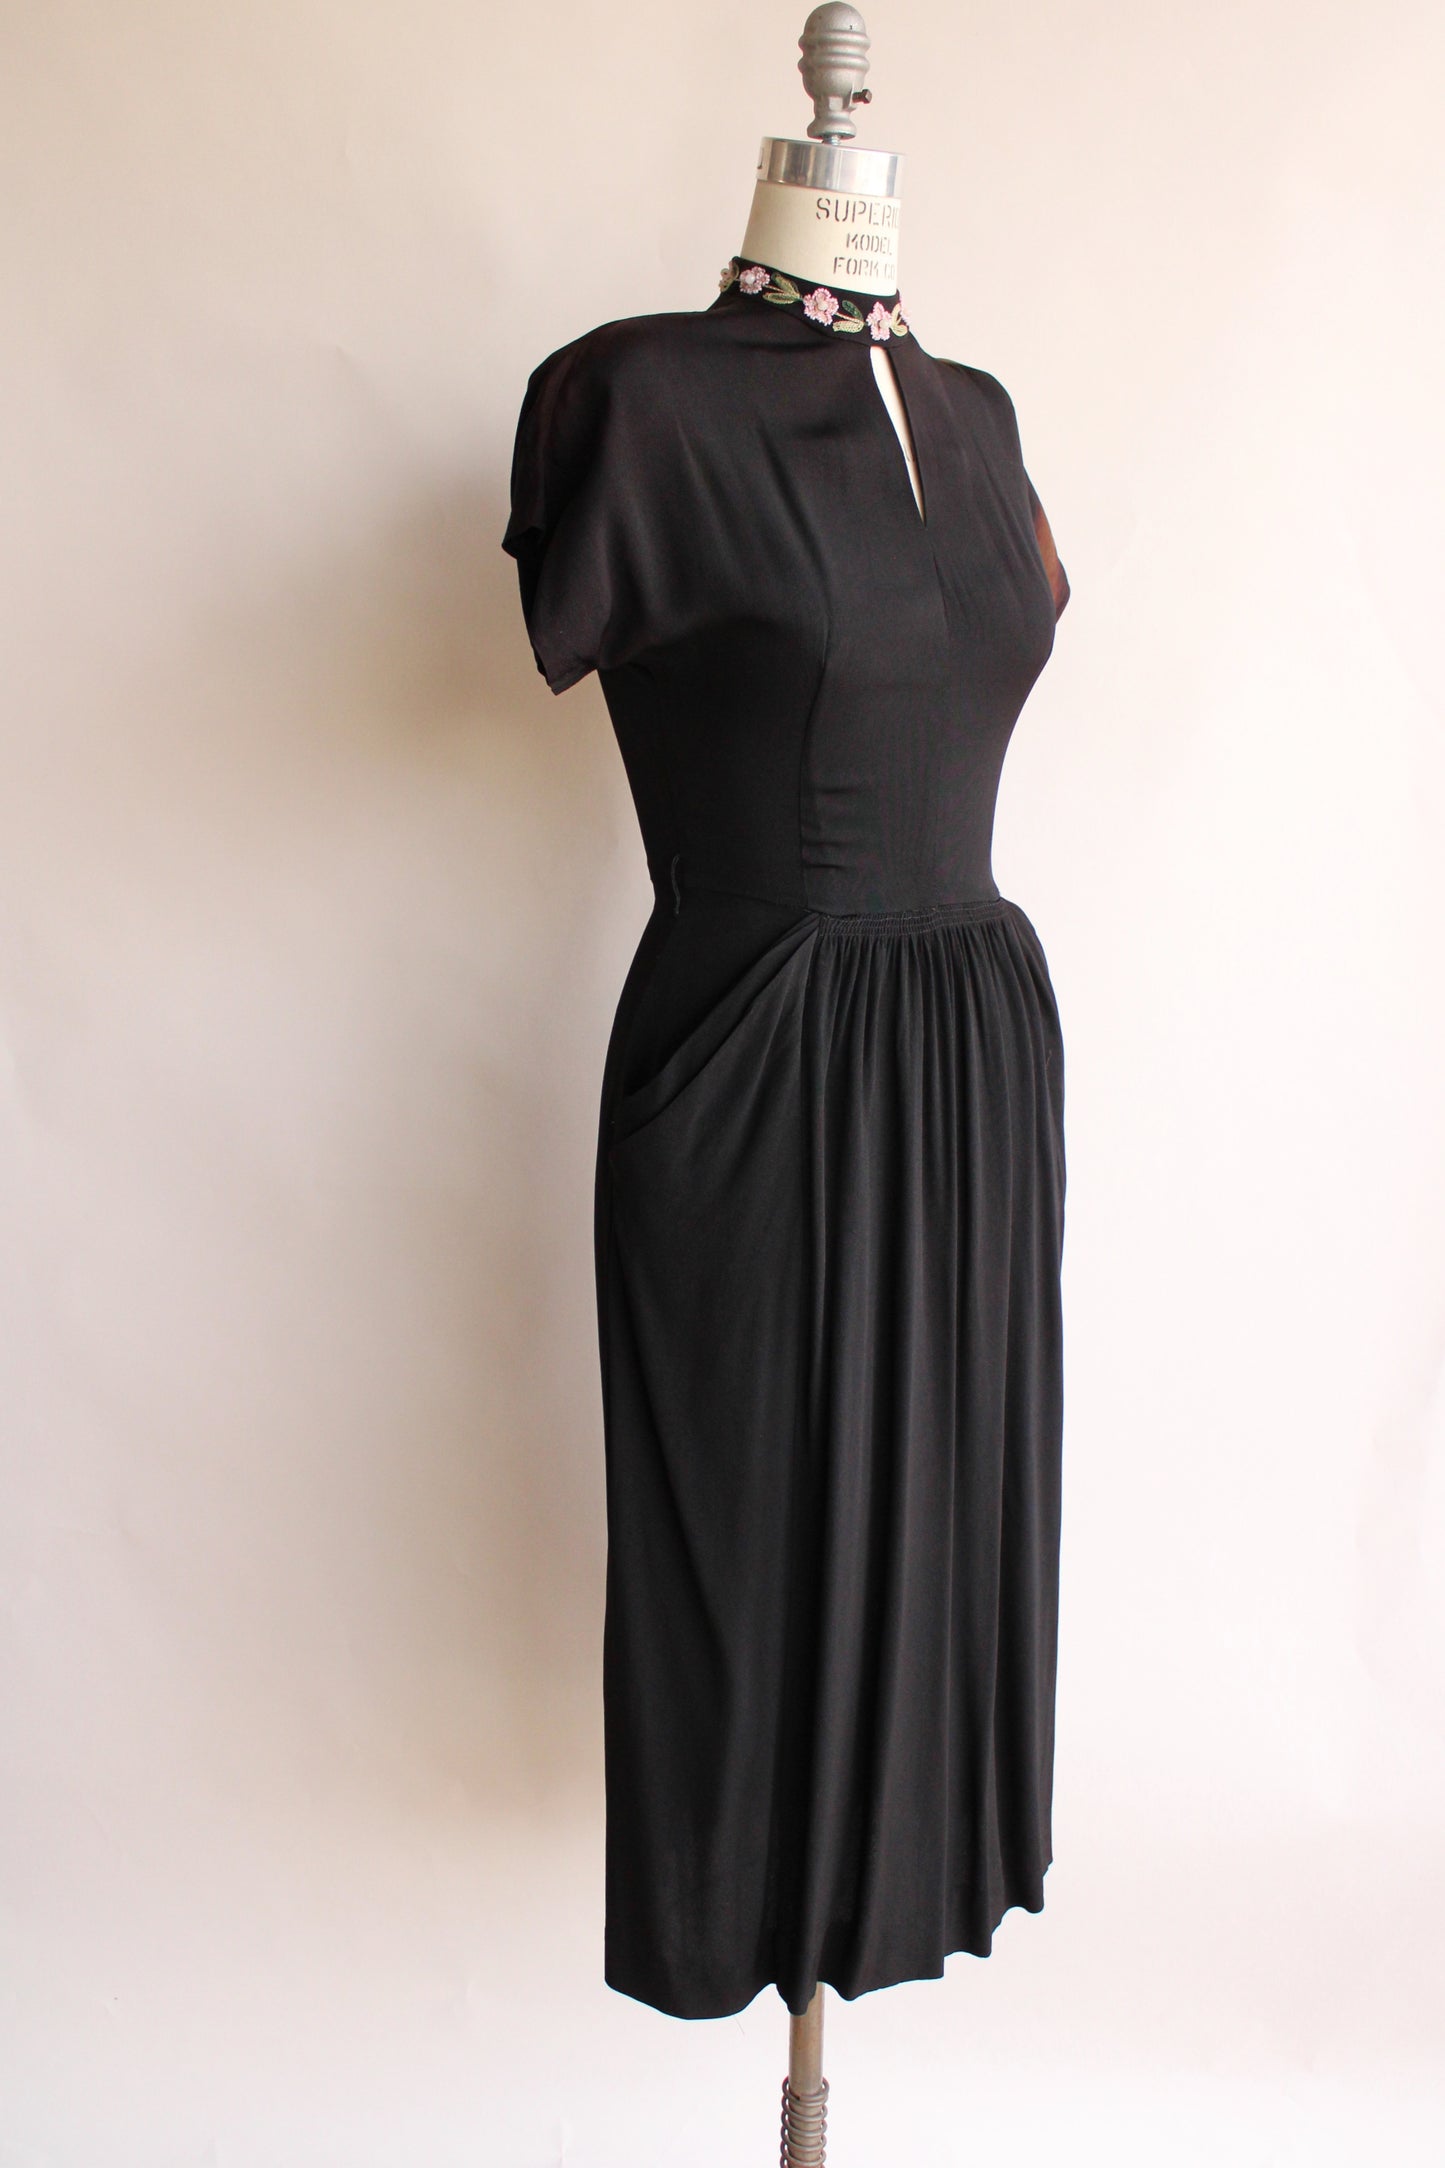 Vintage 1940s Black Dress with Floral Beading